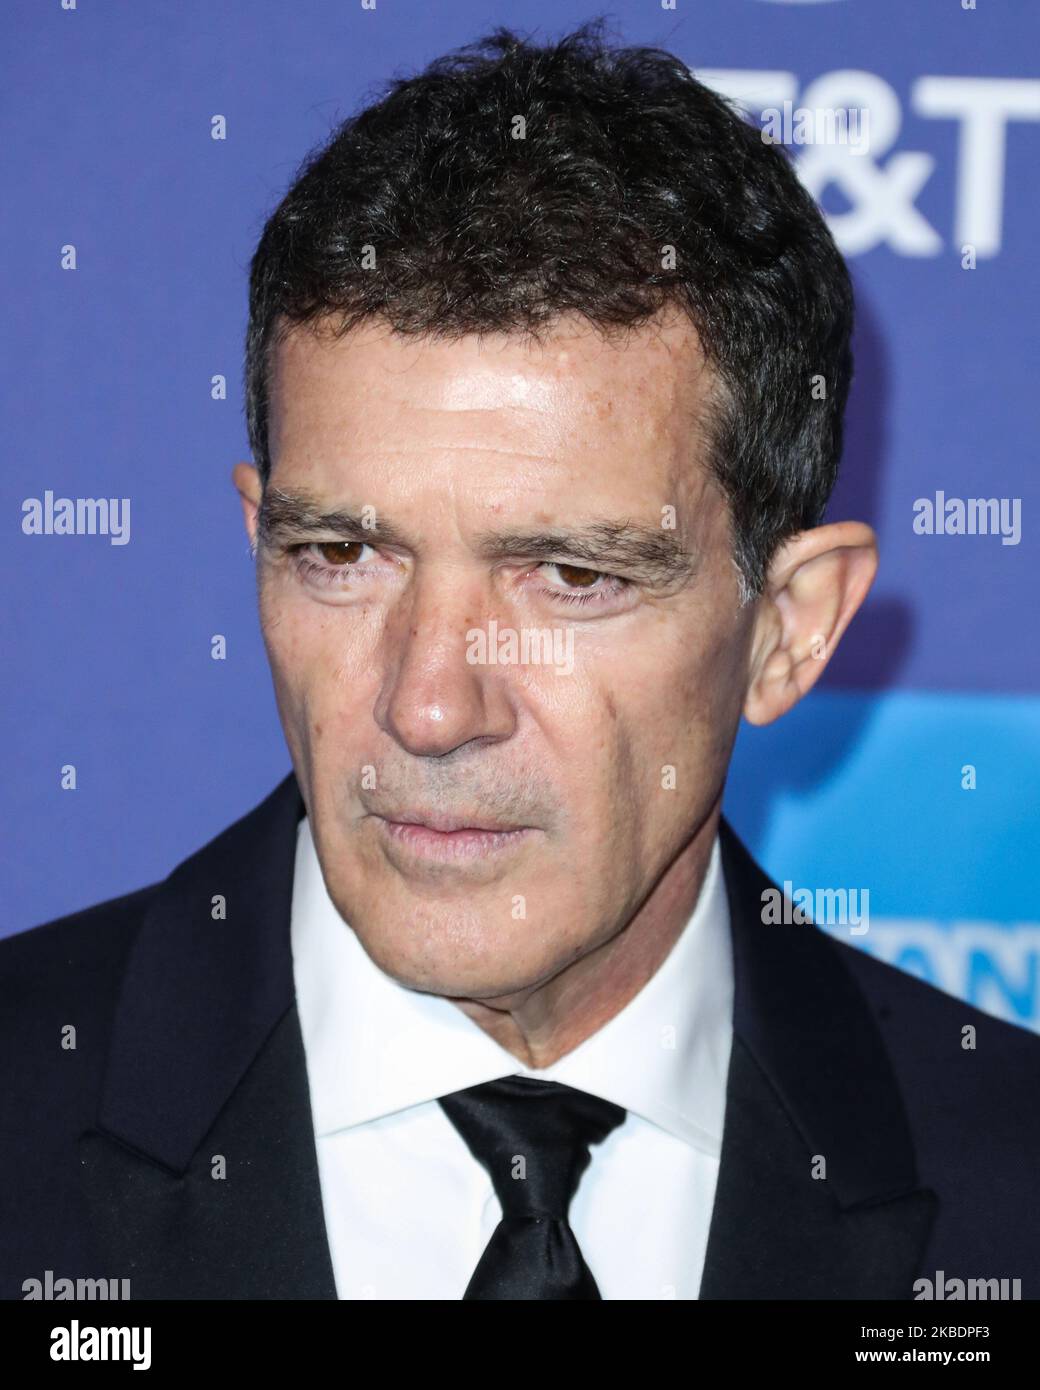 PALM SPRINGS, CALIFORNIA, USA - JANUARY 02: Antonio Banderas arrives at the 31st Annual Palm Springs International Film Festival Awards Gala held at the Palm Springs Convention Center on January 2, 2020 in Palm Springs, California, United States. (Photo by Xavier Collin/Image Press Agency/NurPhoto) Stock Photo